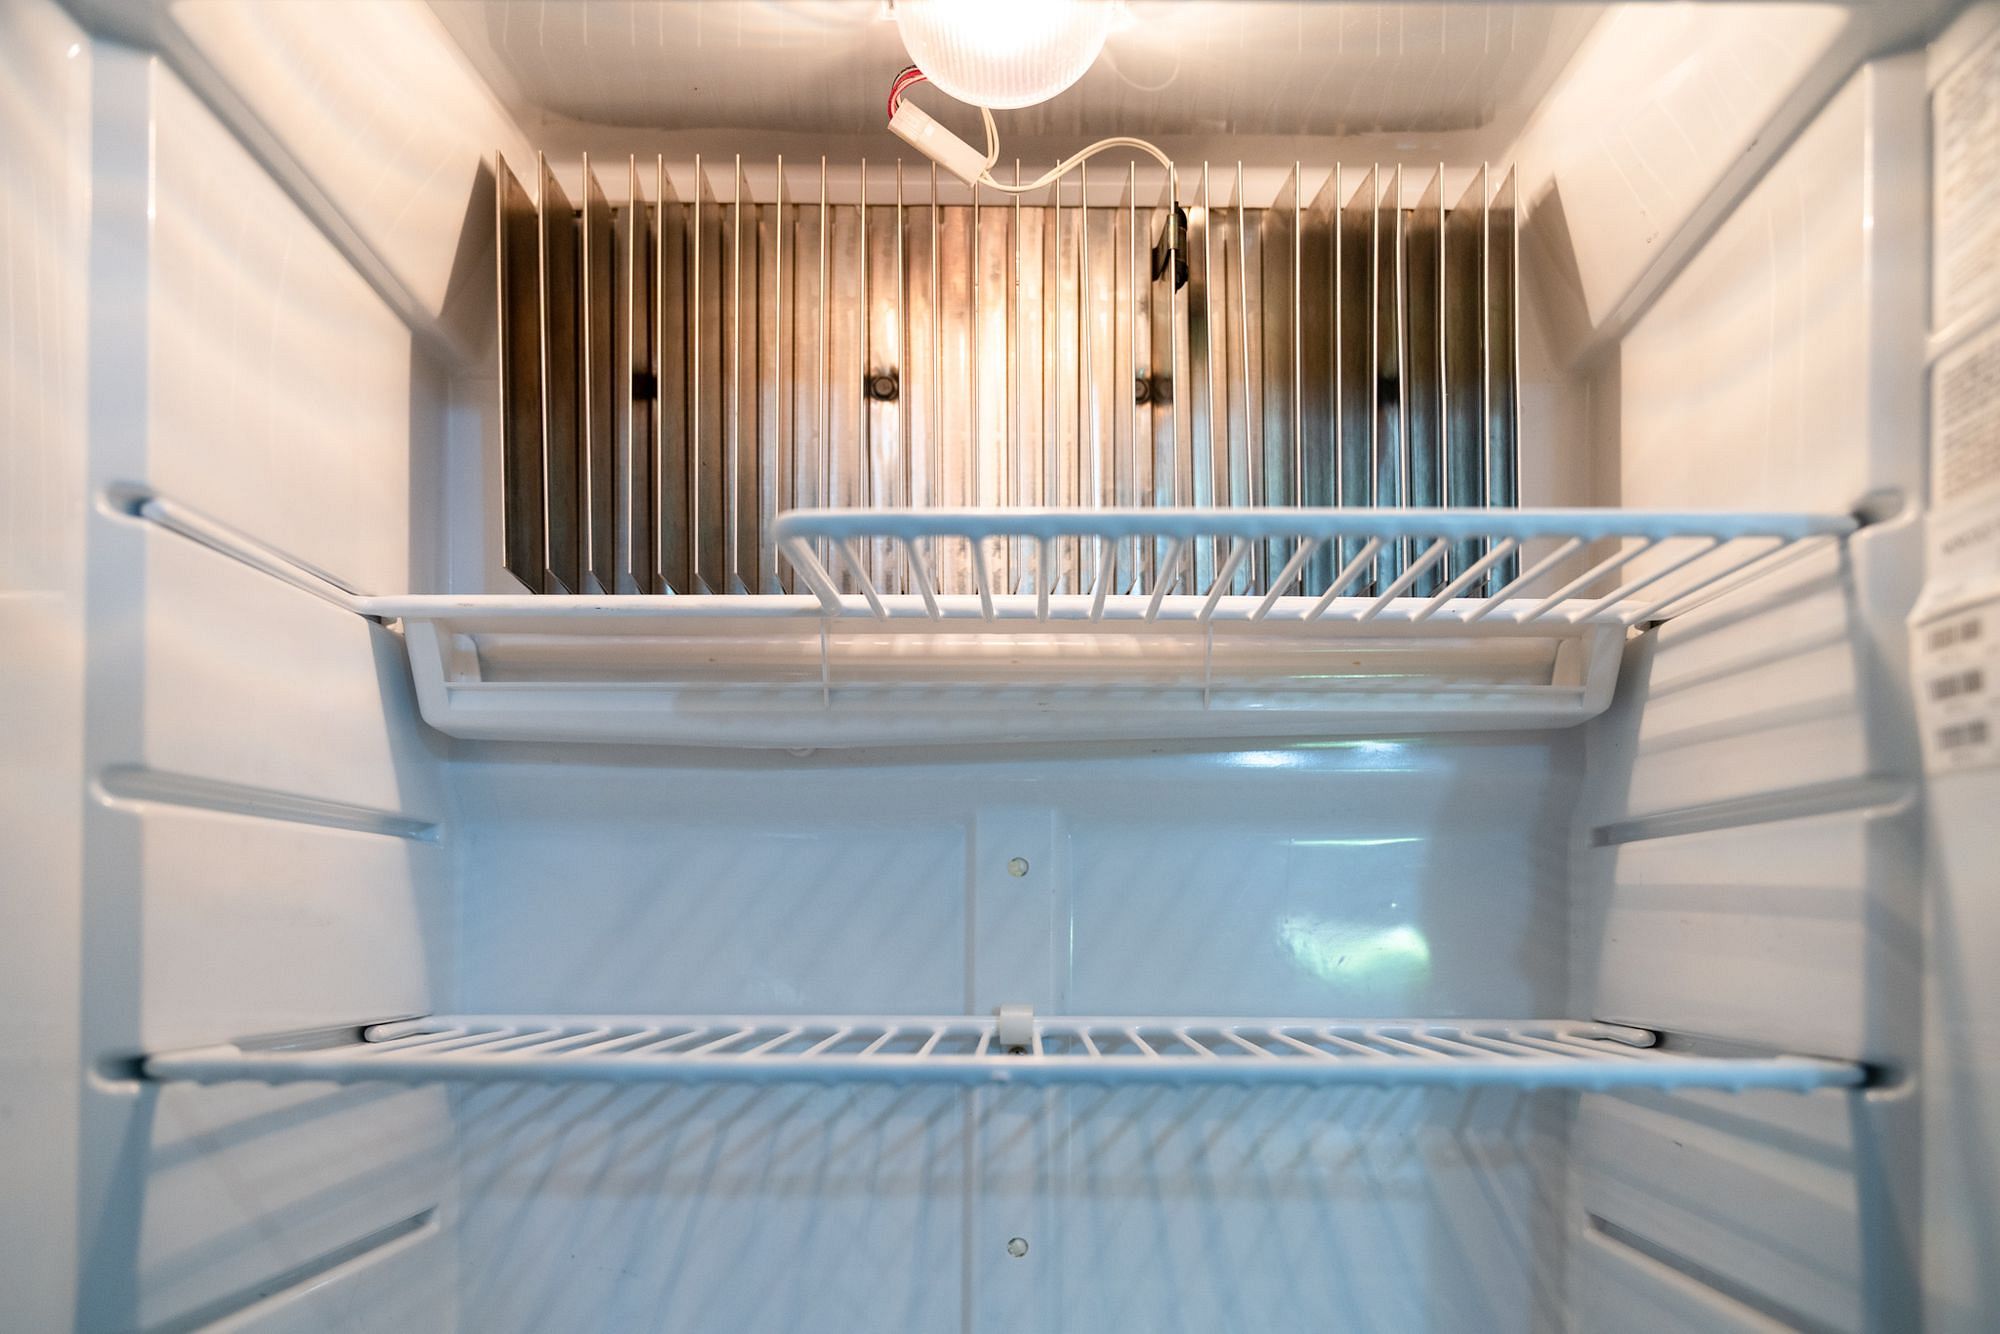 Upgrade To a Residential Fridge in Your RV 